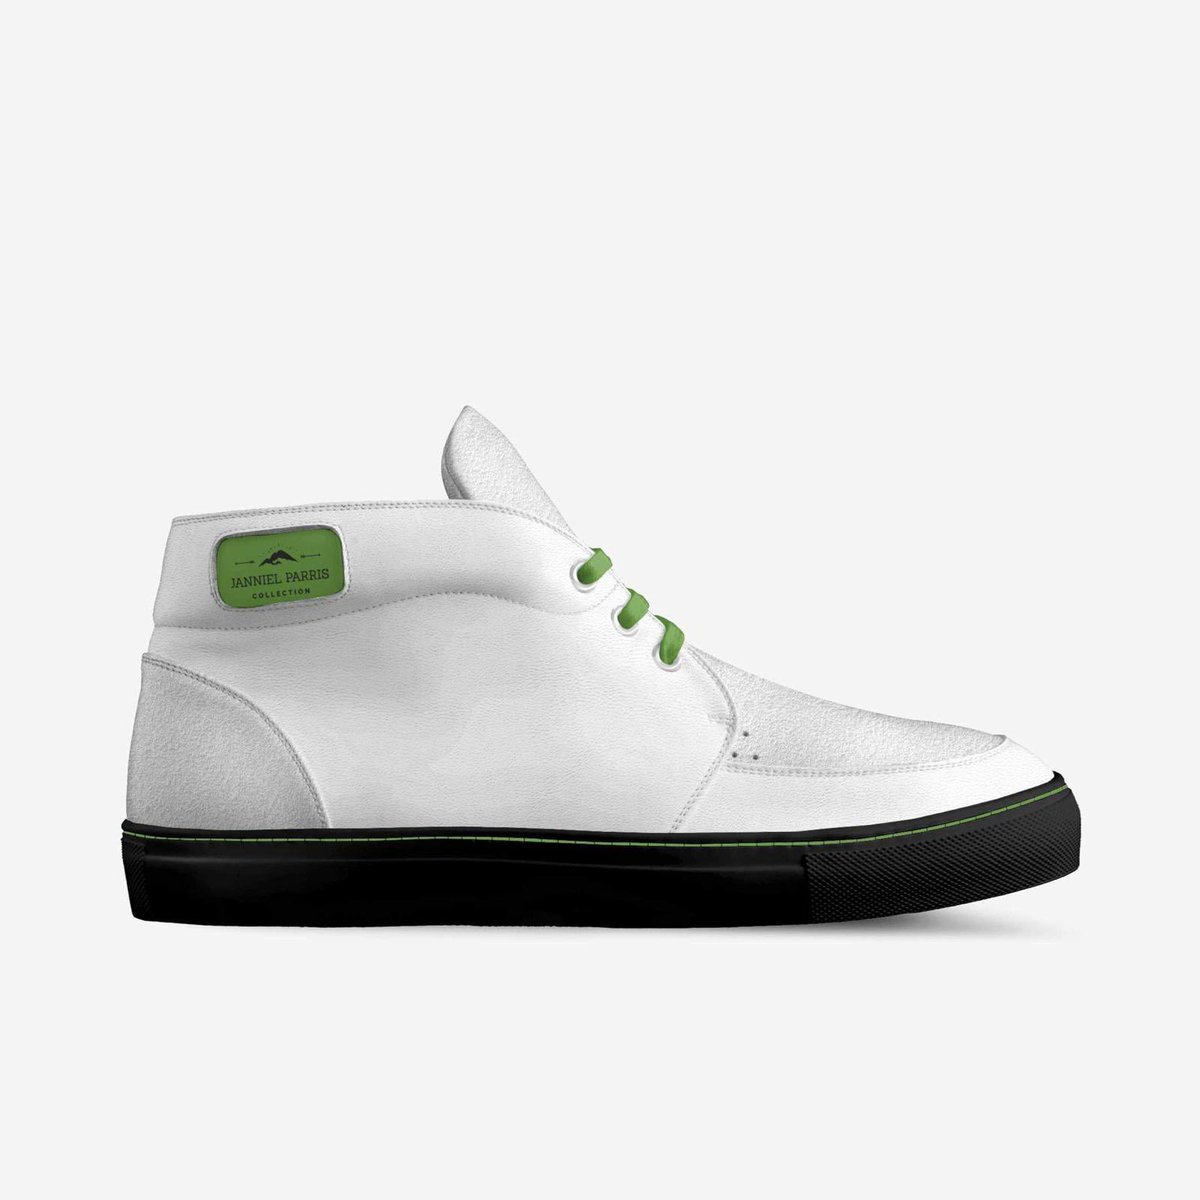 #LimeGrove coming soon 
#slickandwhite  #JannielParrisCollection
#newkicks
#Italianmade
#handcraftedshoes